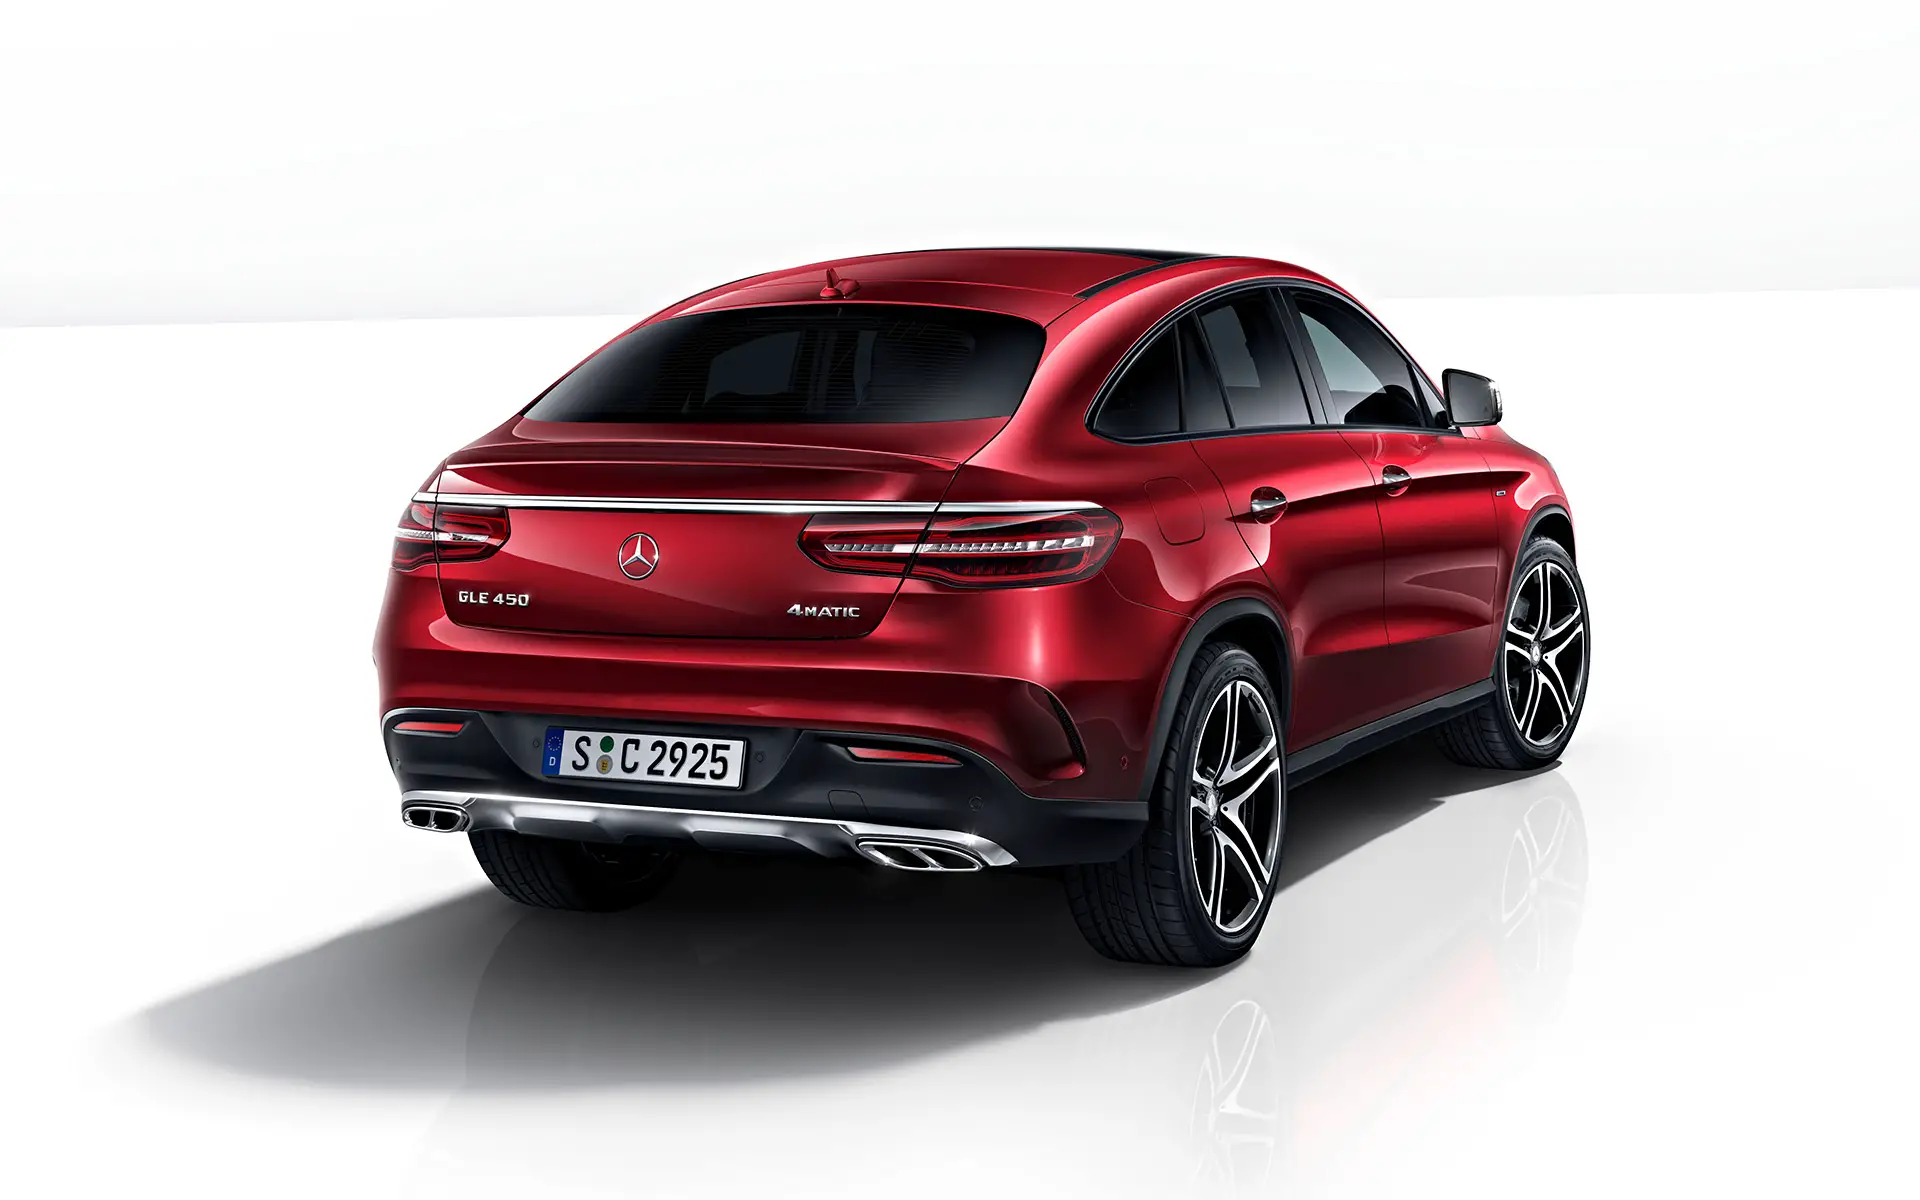 Mercedes Benz AMG GLE 450 rear cross view